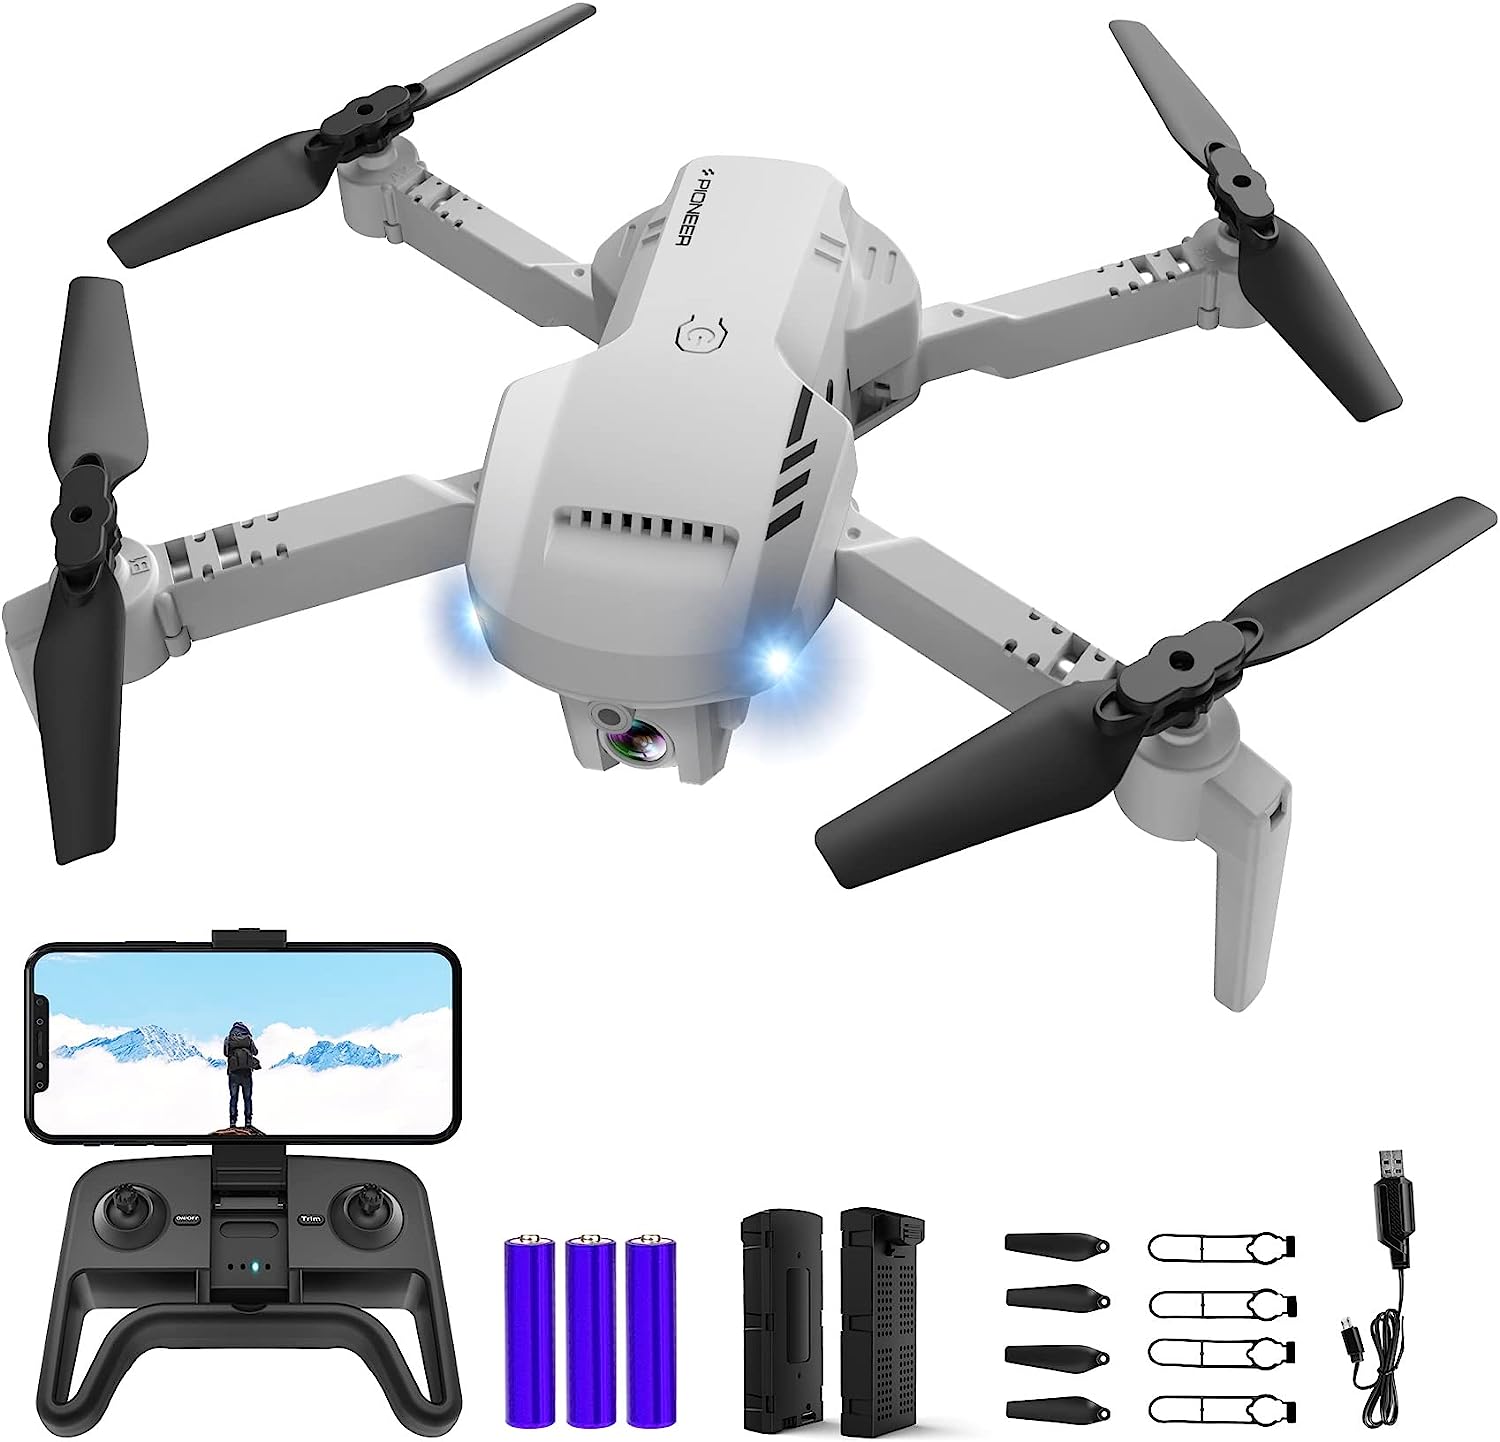 RADCLO Mini Drone with Camera - 1080P HD FPV Foldable Drone with Carrying Circumstance, 2 Batteries, 90° Adjustable Lens, One Key Take Off/Land, Altitude Hold, 360° Flip, Toys Gifts for Kids, Adults, beginners, Remote Controlled, Black